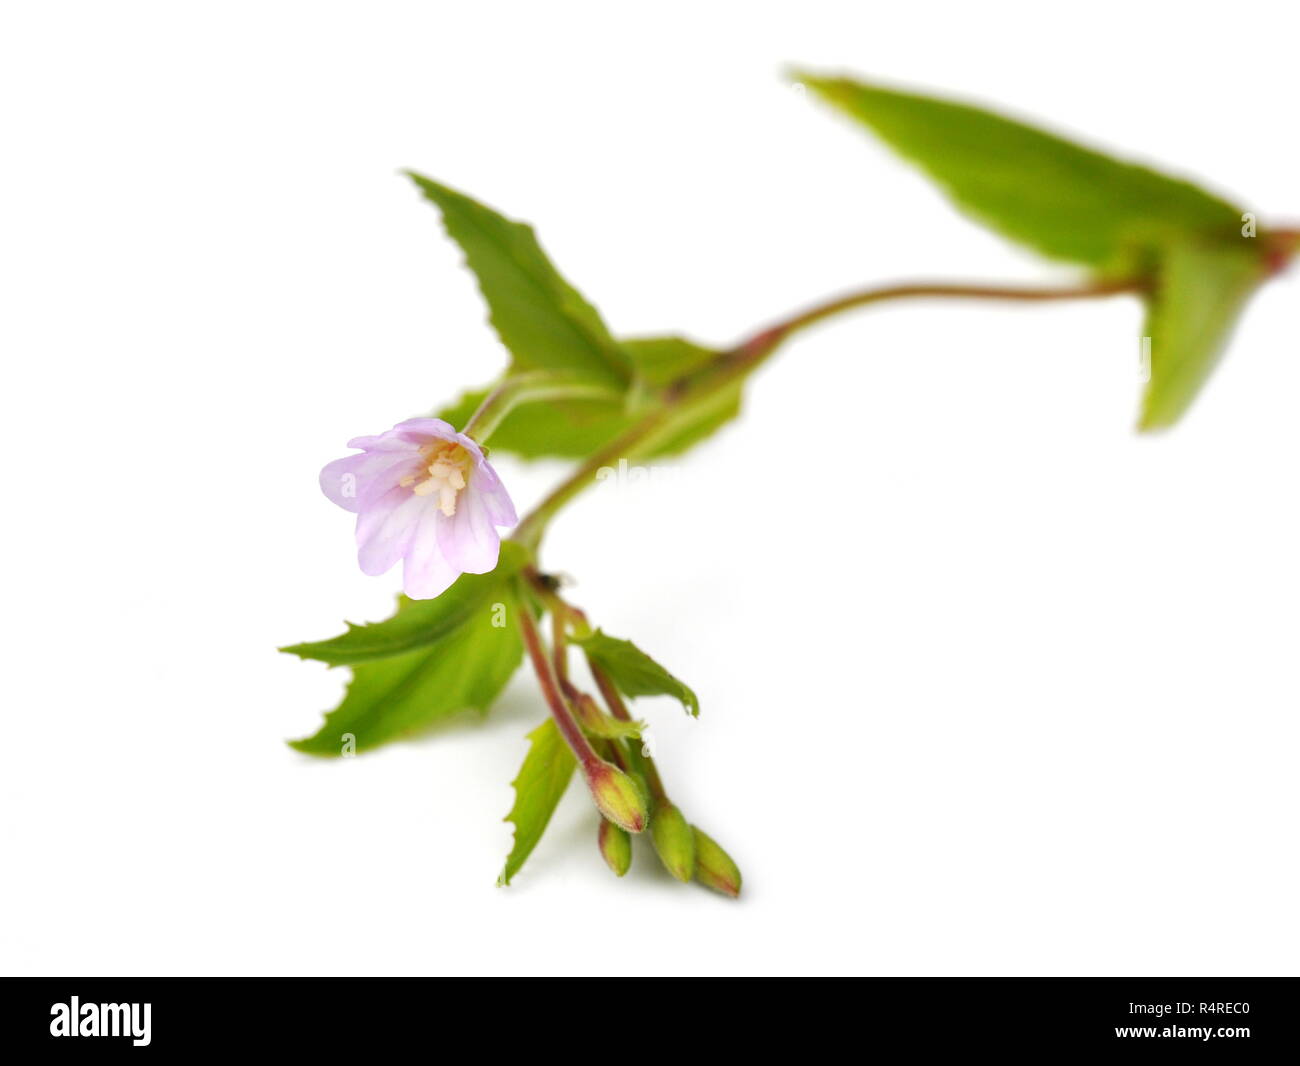 Broad-leaved willowherb on white background Stock Photo